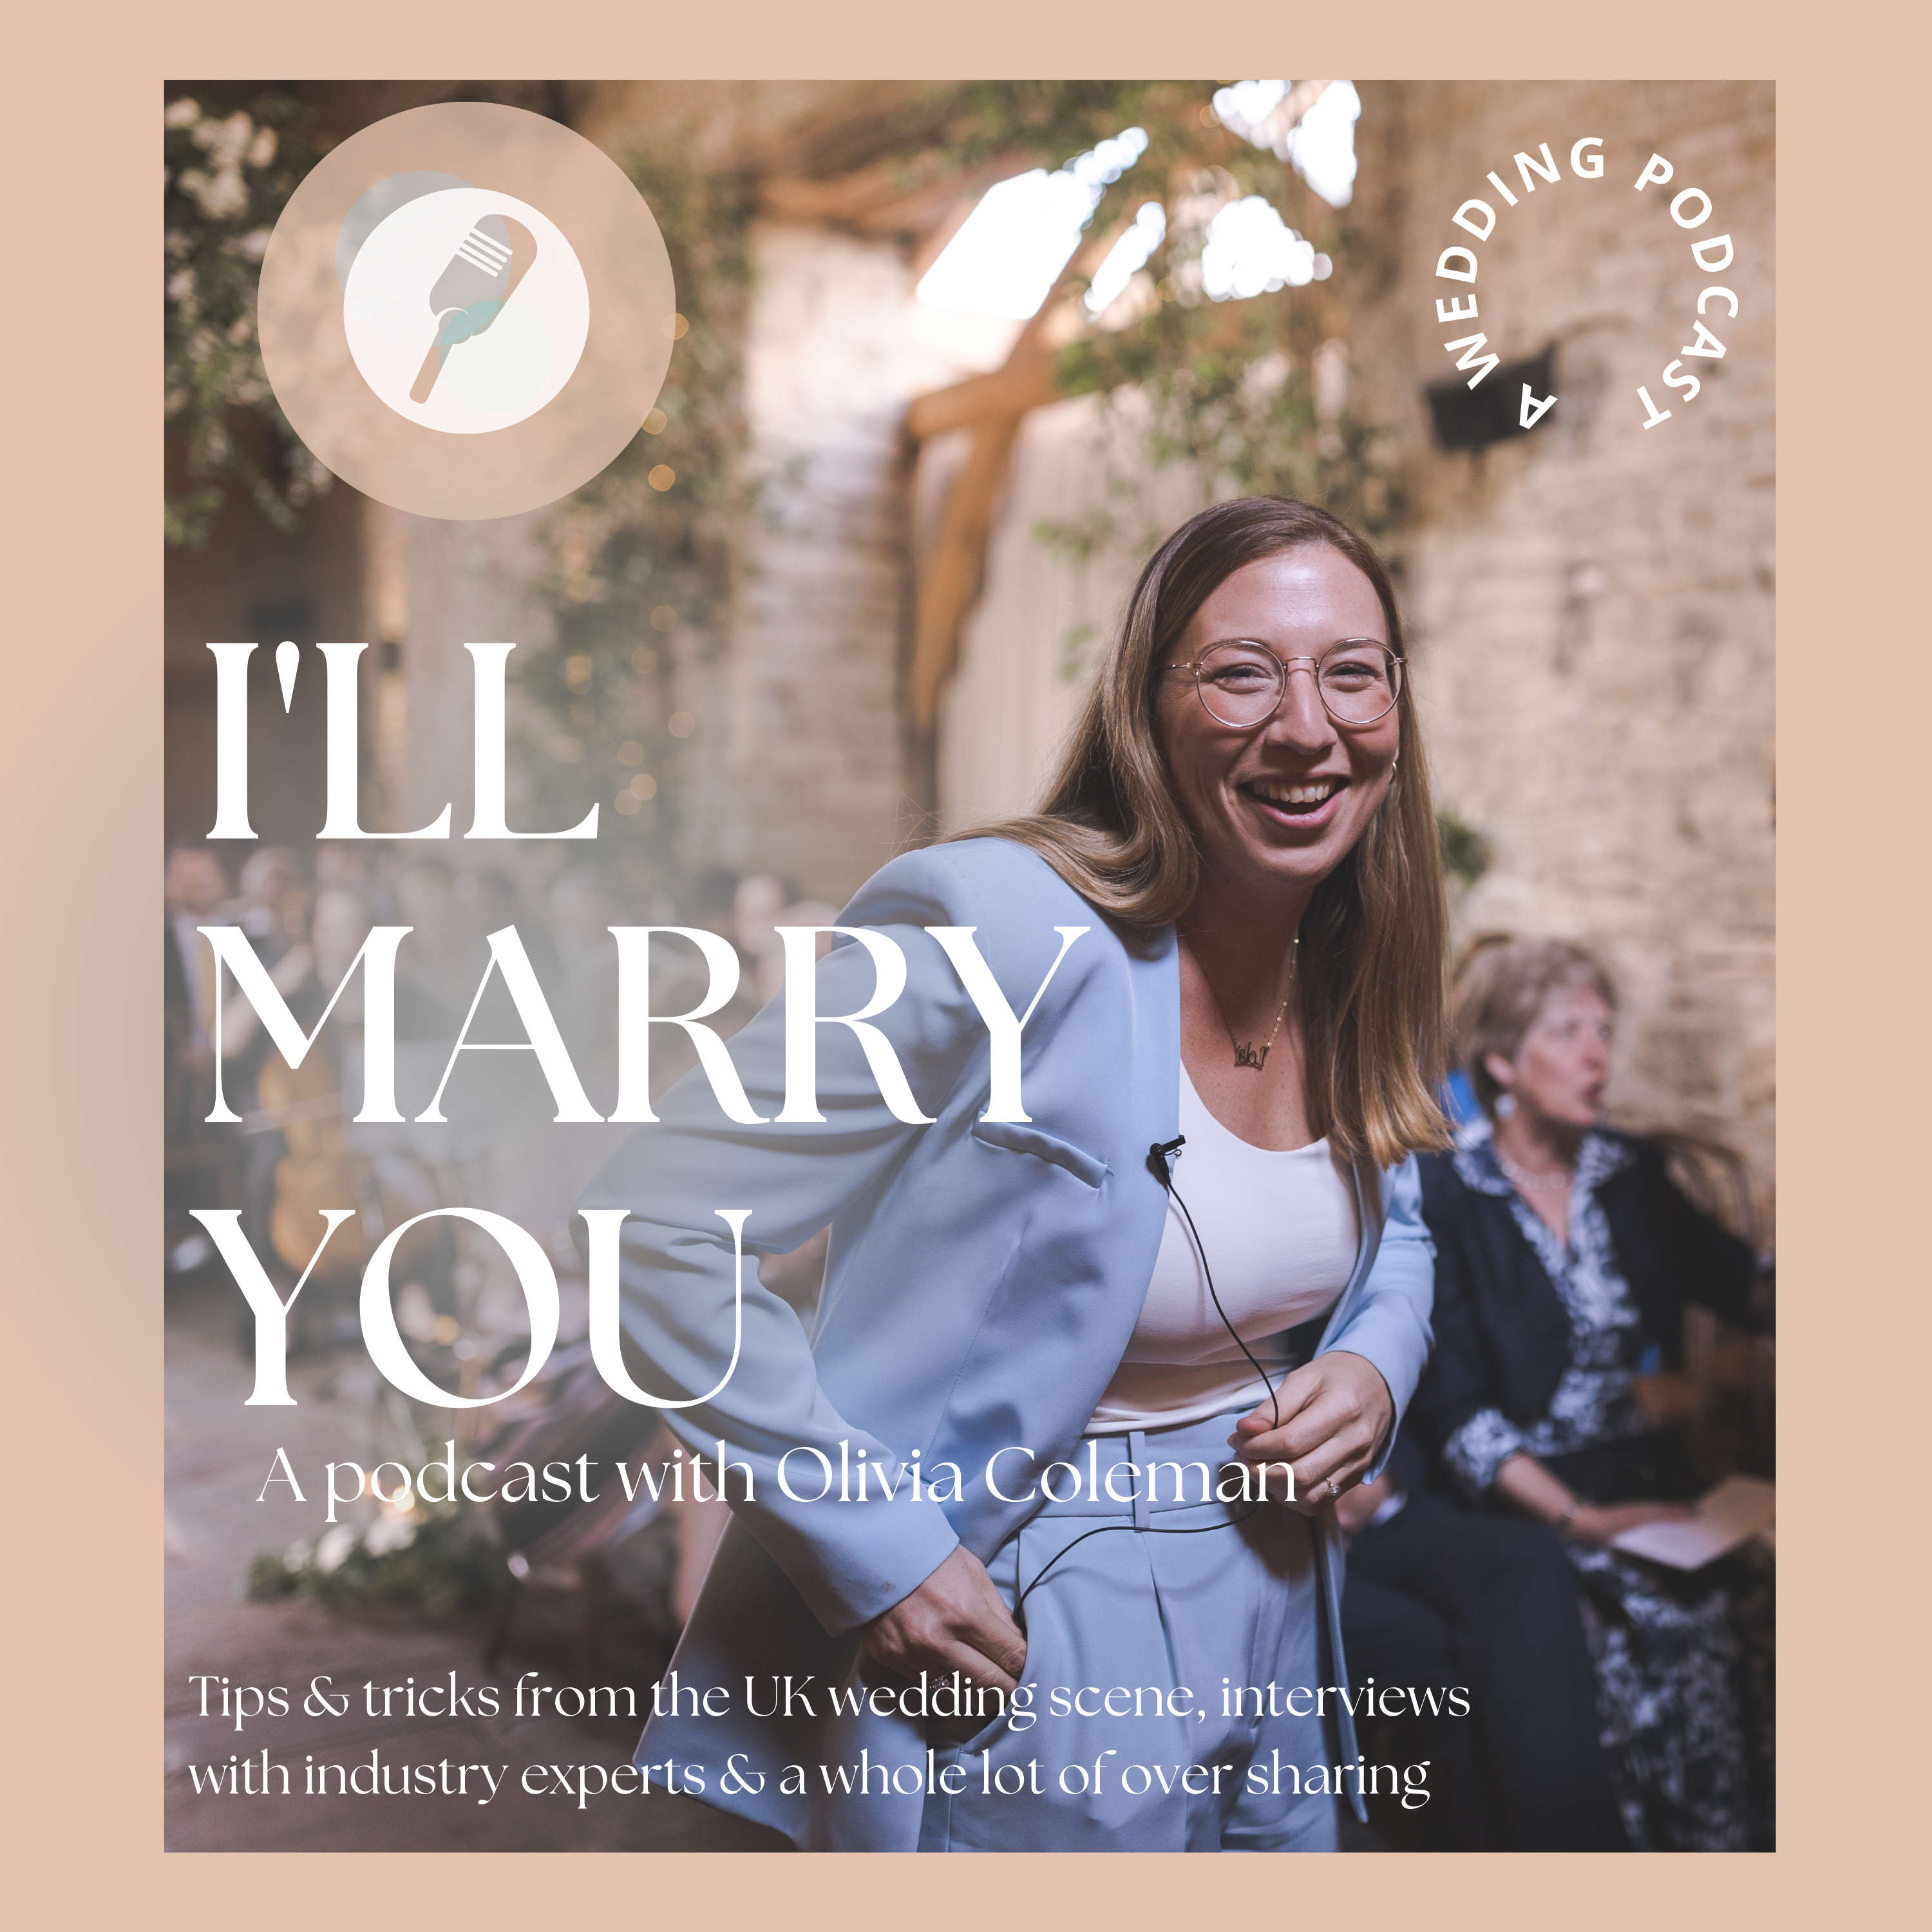 Artwork for podcast I'll Marry You; the UK Wedding Podcast